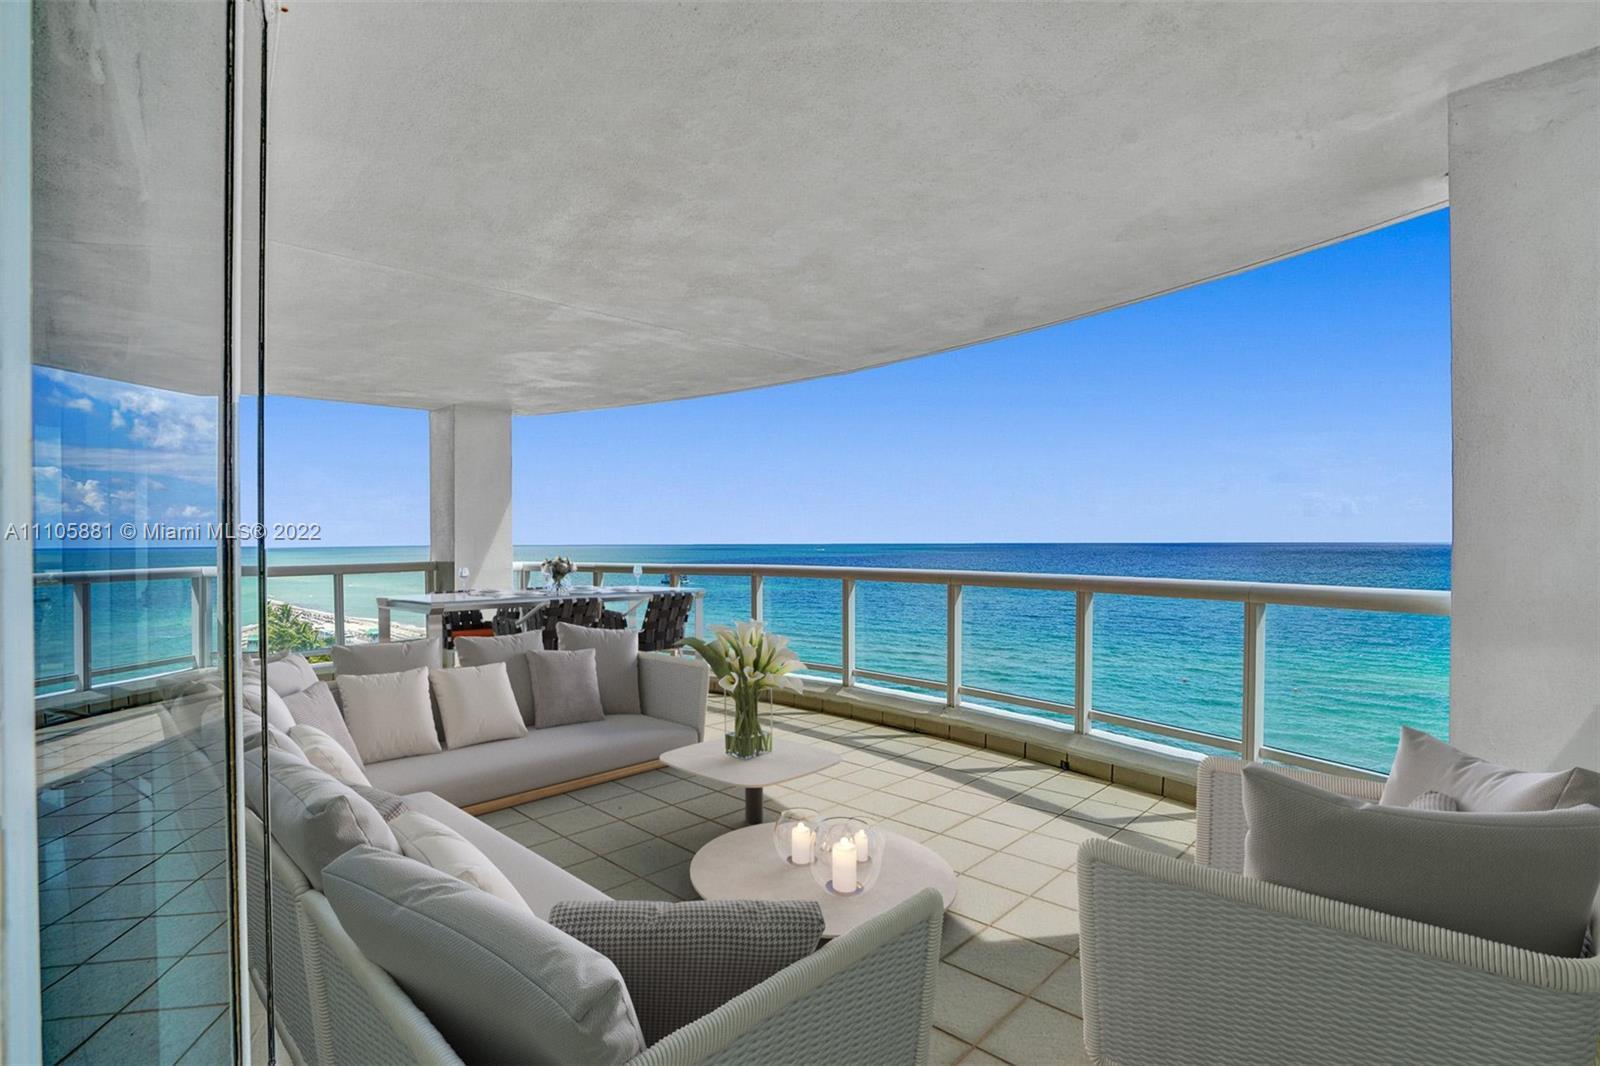 Spectacular direct oceanfront 3BD/3BA condo at the remodeled La Tour, a boutique building on the new